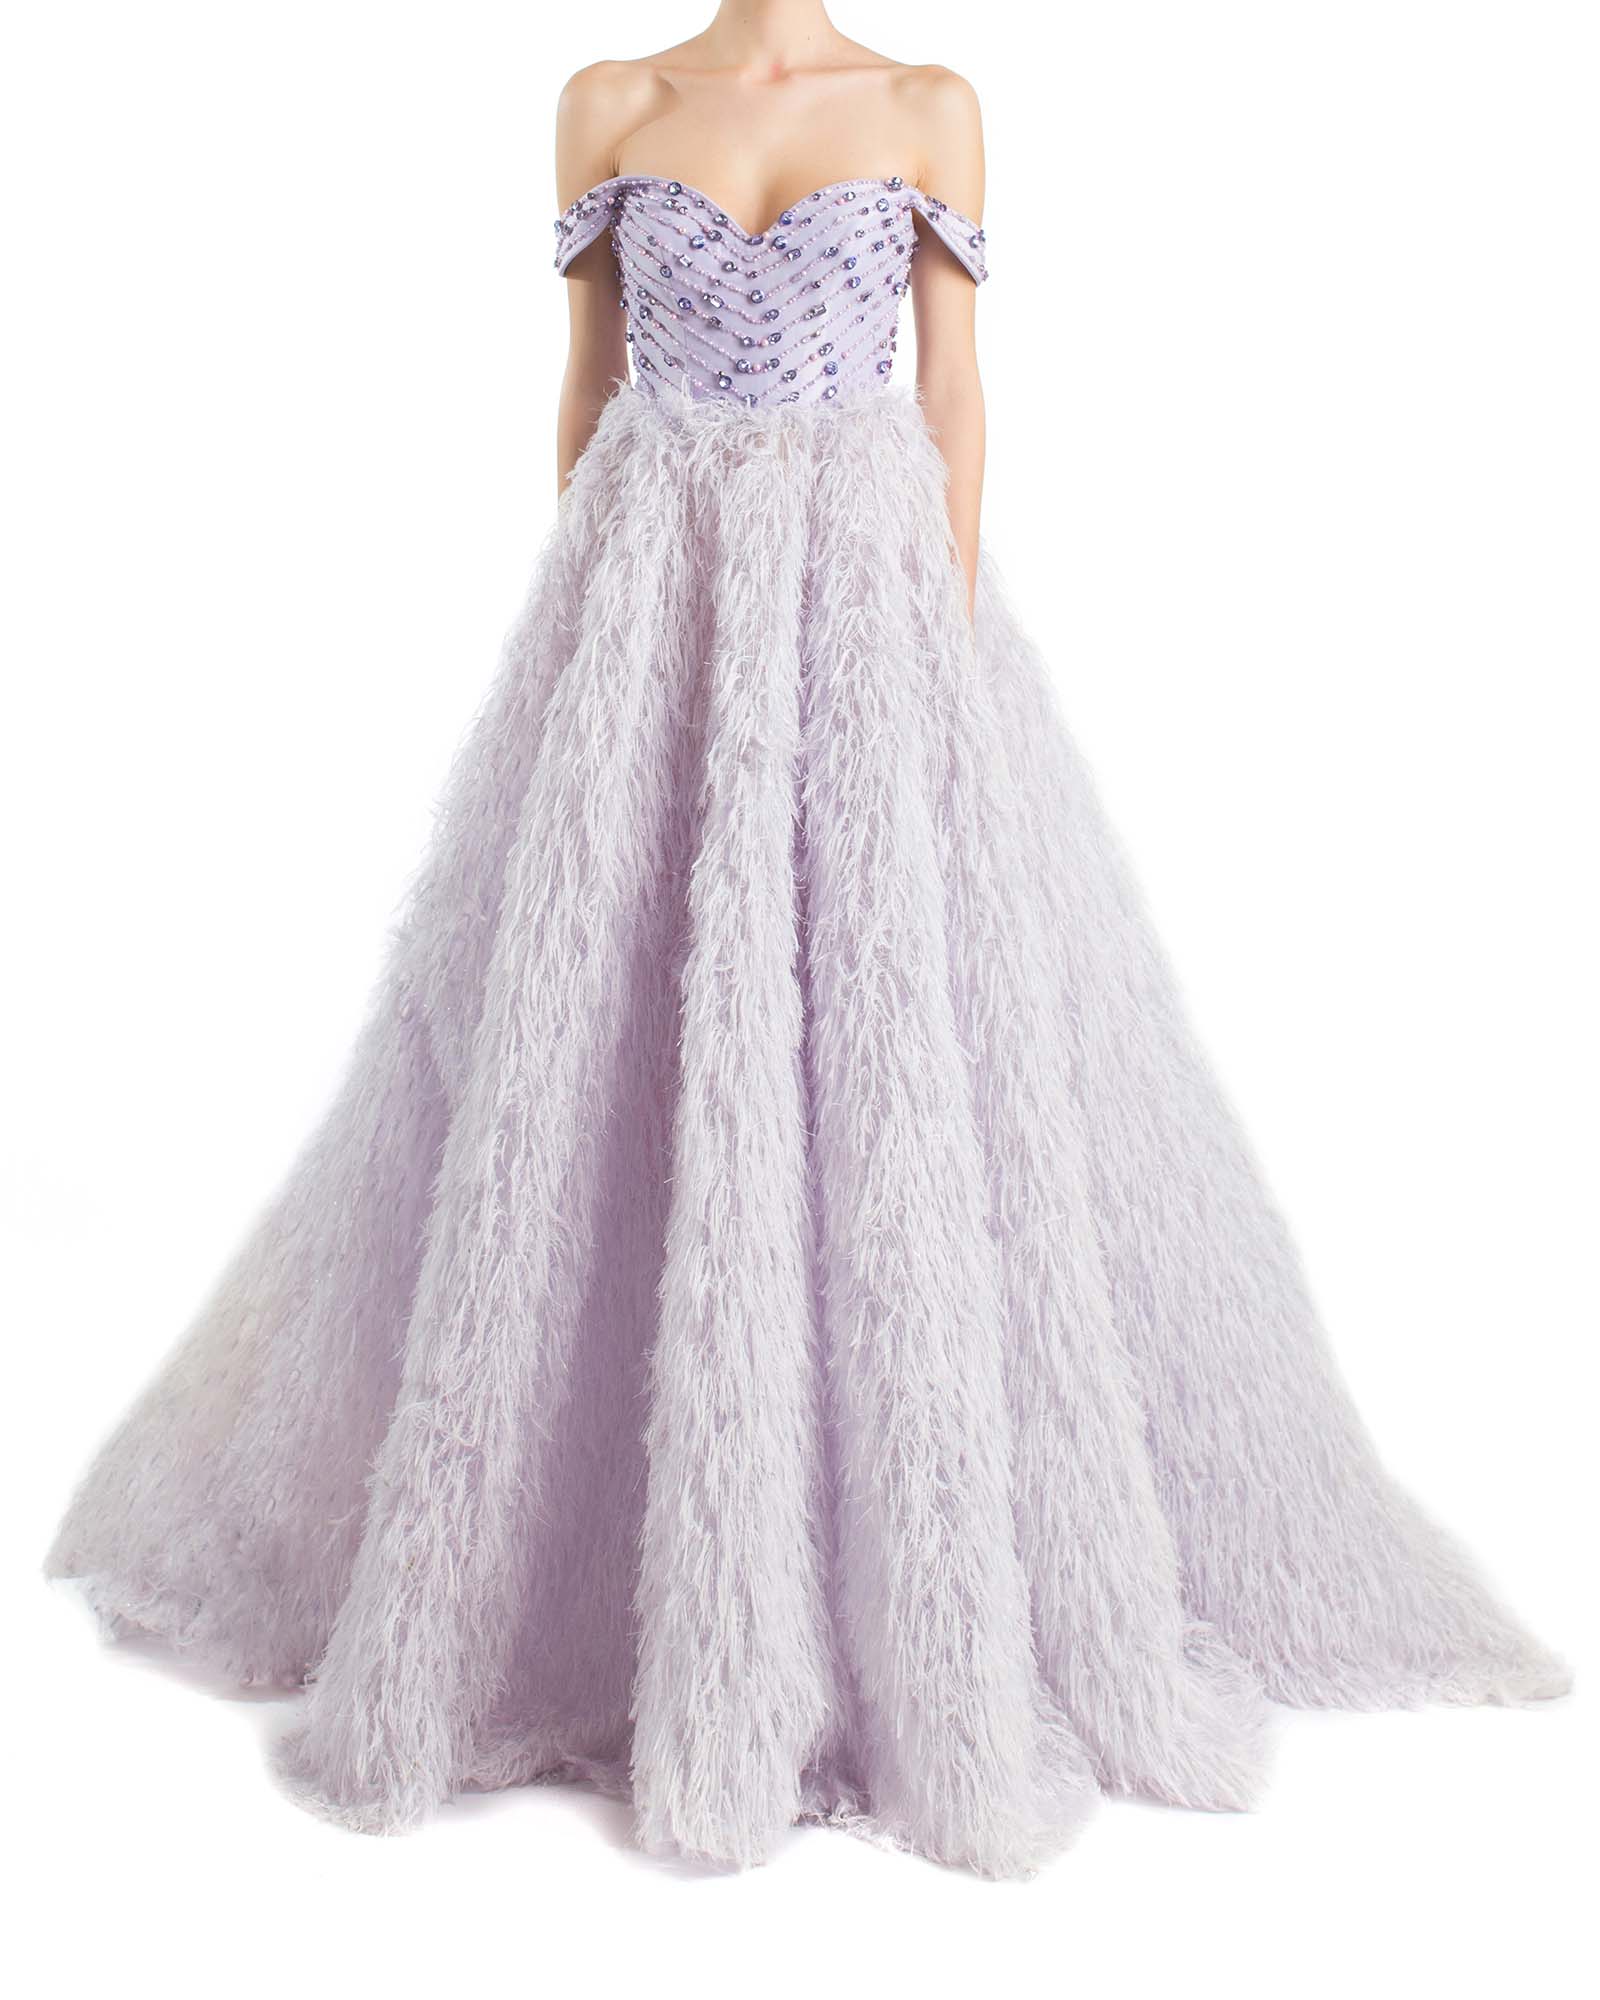 Lilac feathers gown